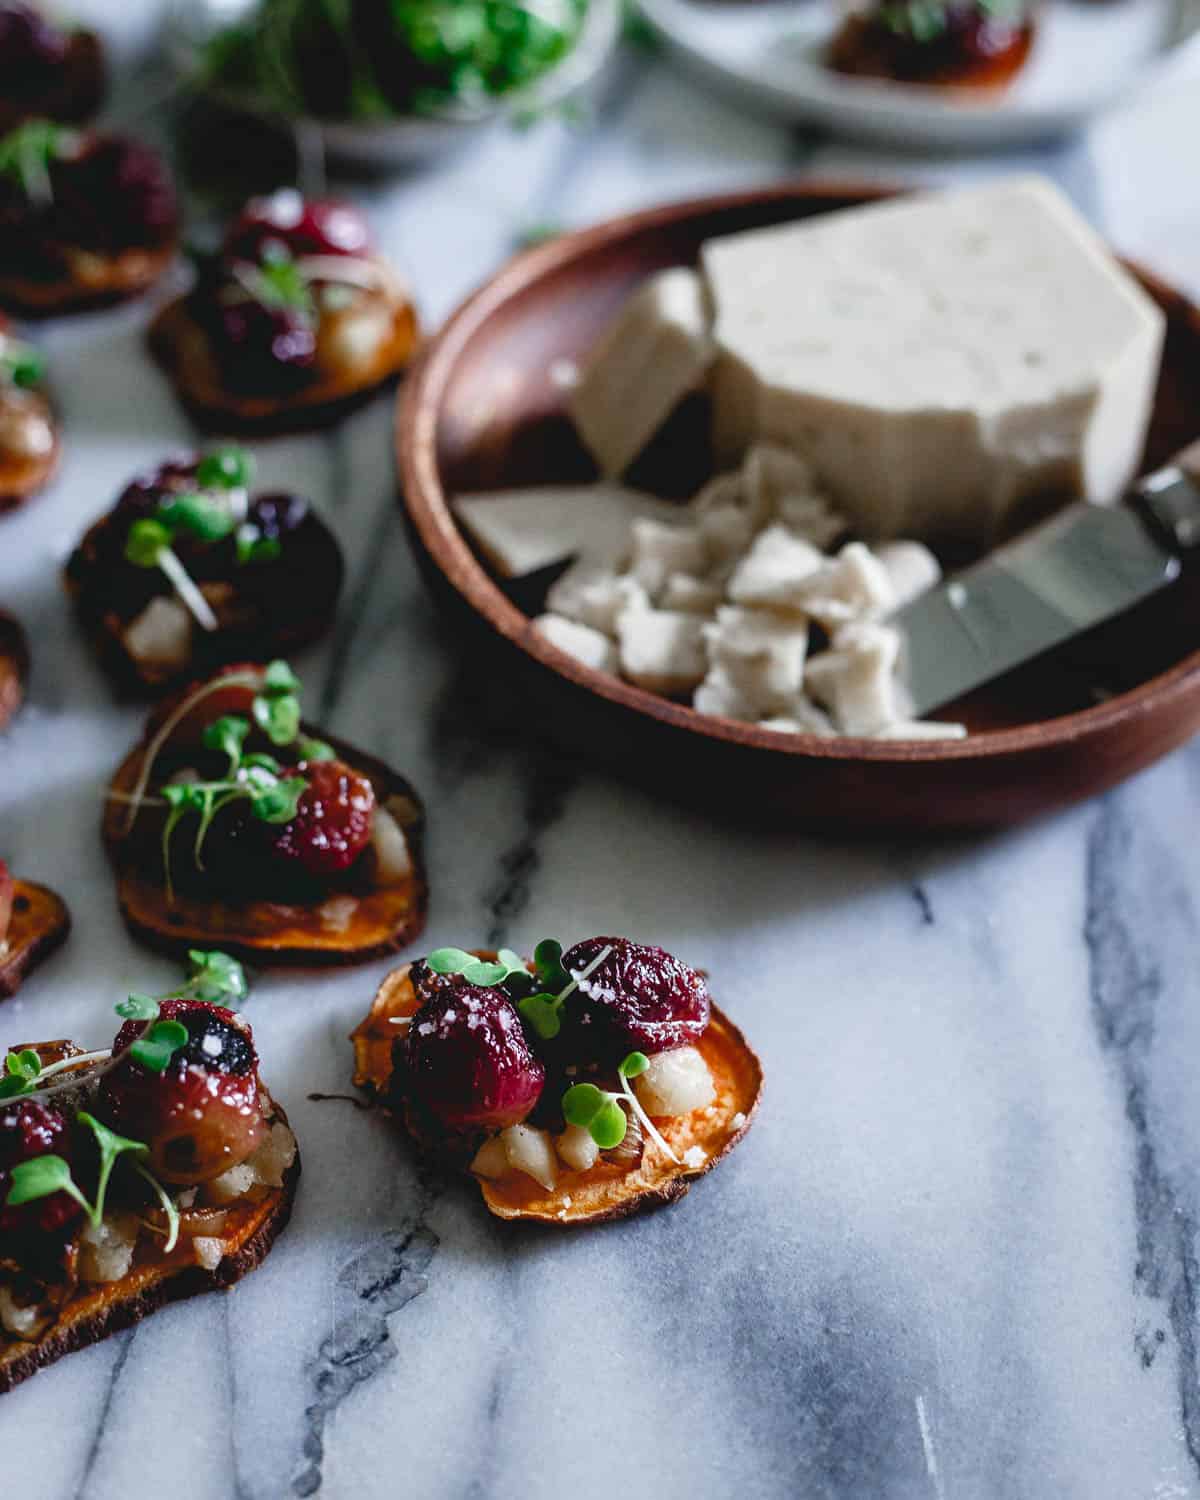 Sweet and savory play wonderfully together in these sweet potato crostini with roasted grapes and caramelized onions.